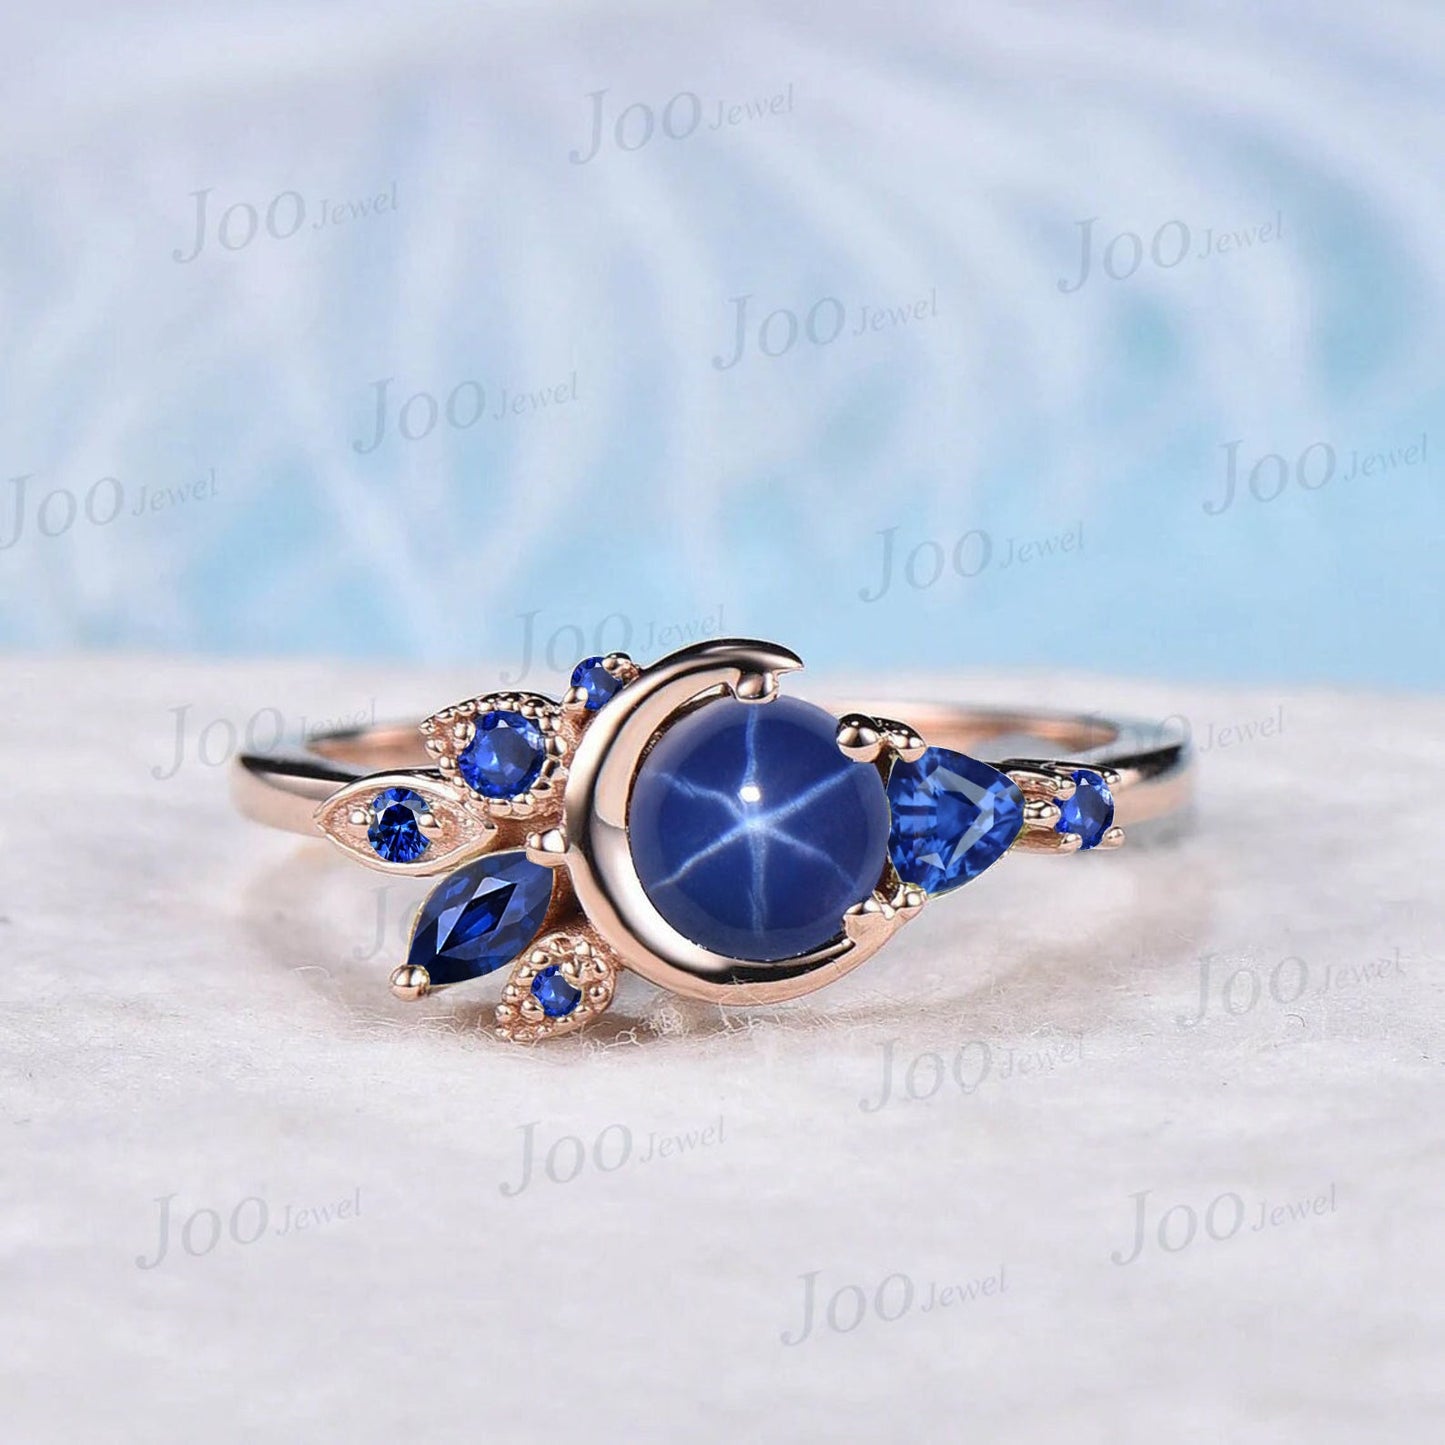 5mm Round Star Sapphire Engagement Ring Moon Blue Sapphire Wedding Ring Cluster Star Blue Engagement Ring Unique Personalized Promise Ring